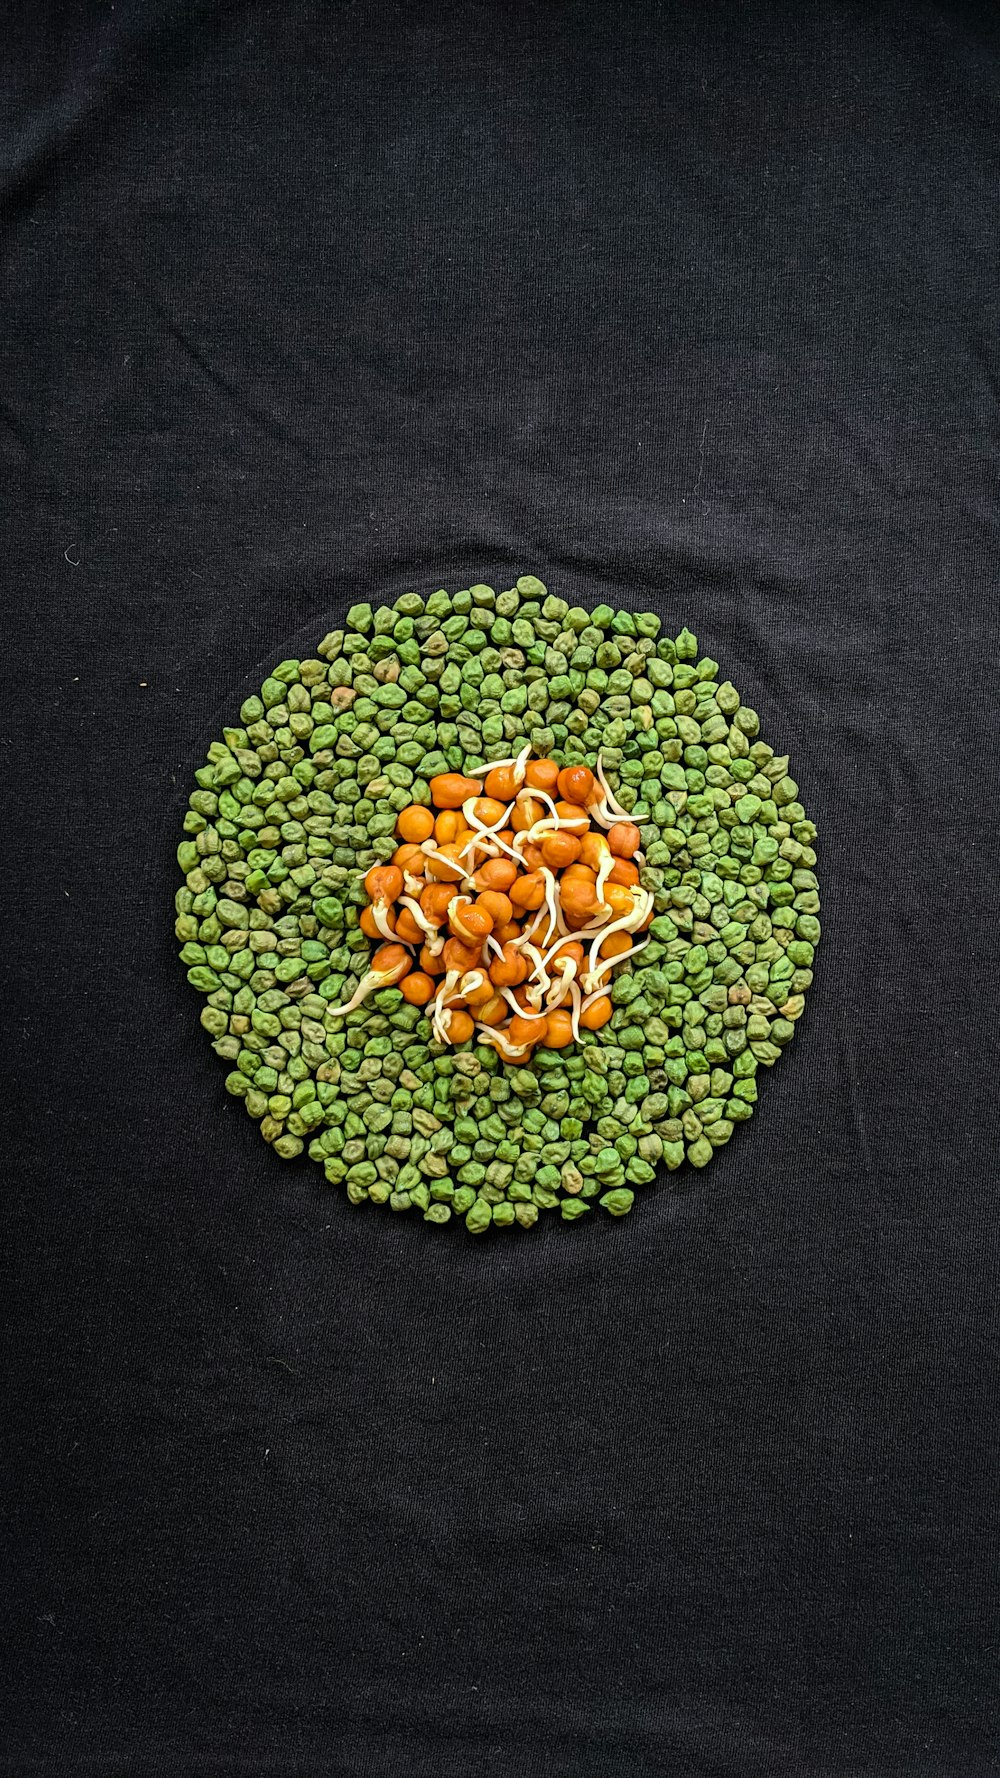 a plate of peas, carrots and sprouts on a black surface